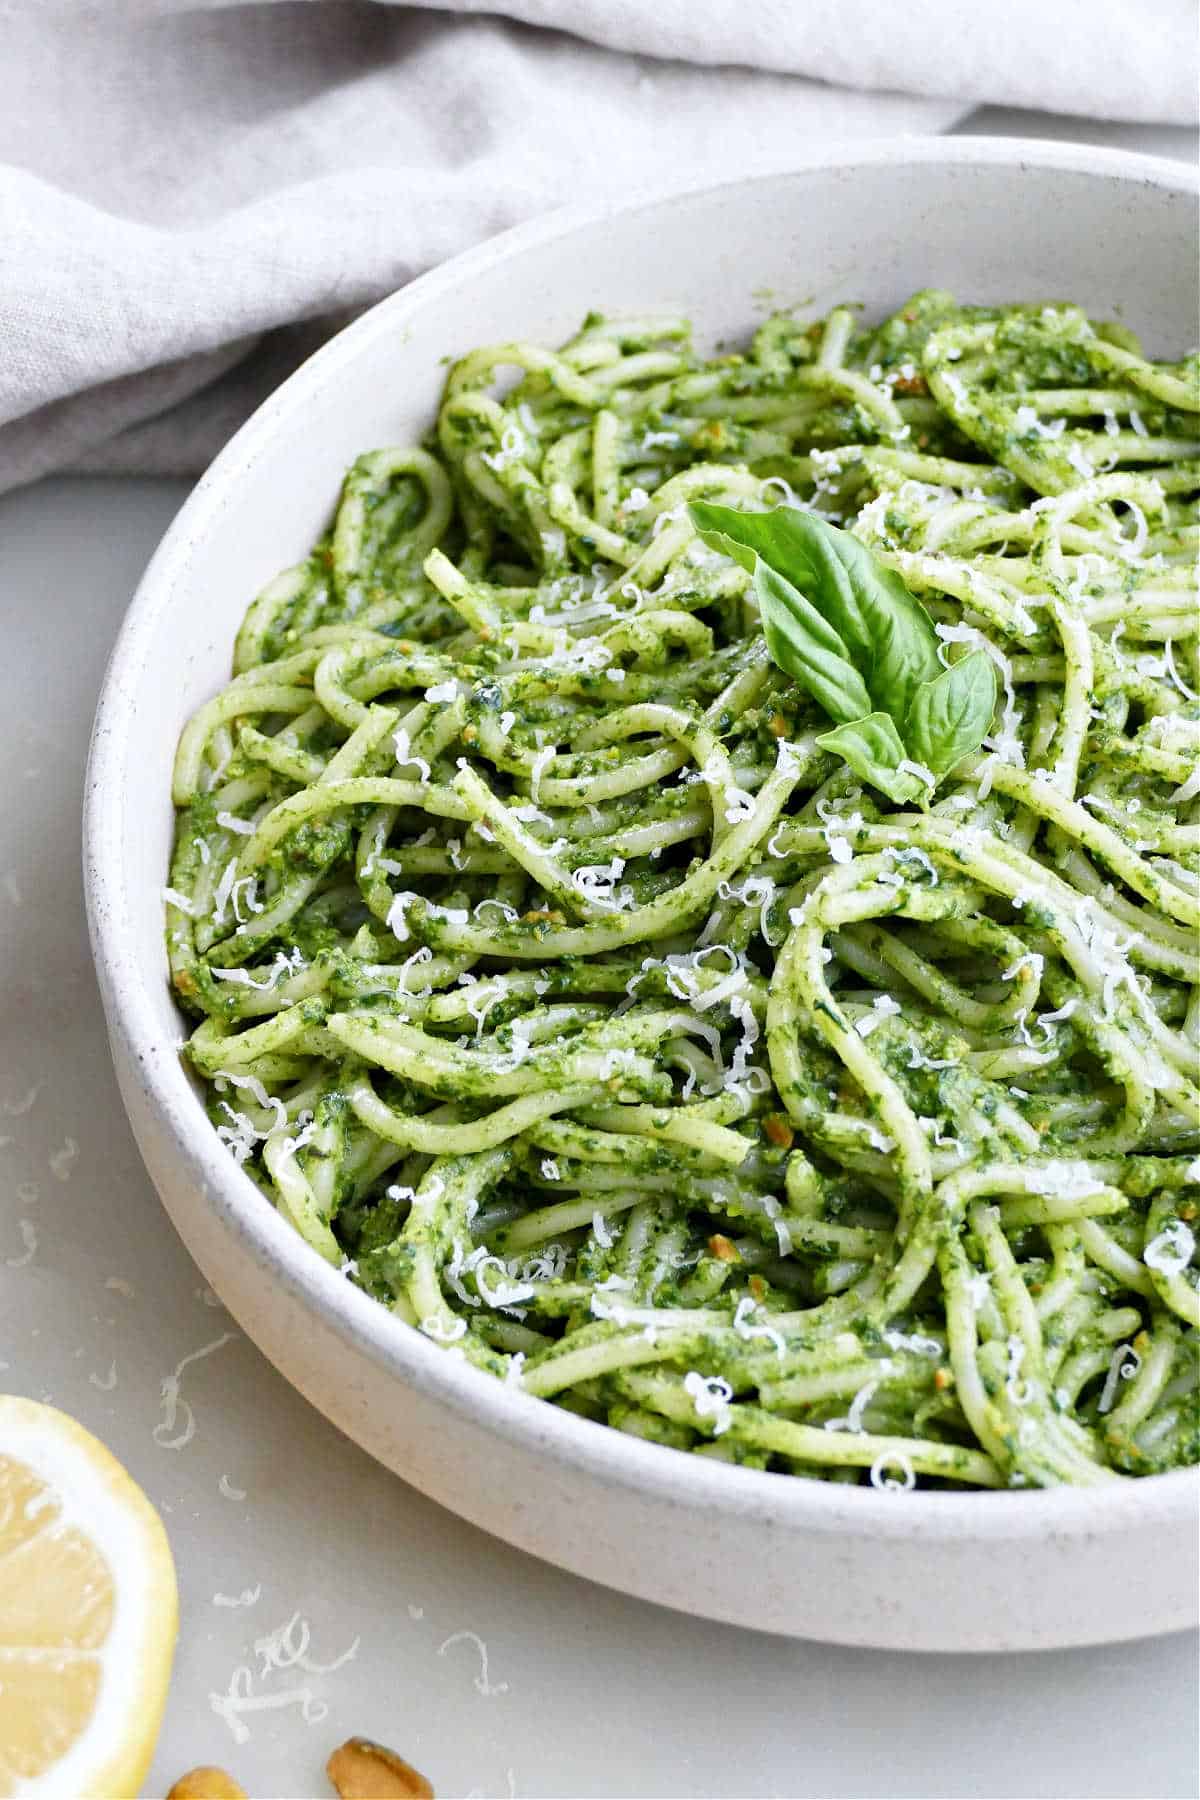 Spinach basil spaghetti in a serving bowl on a counter.